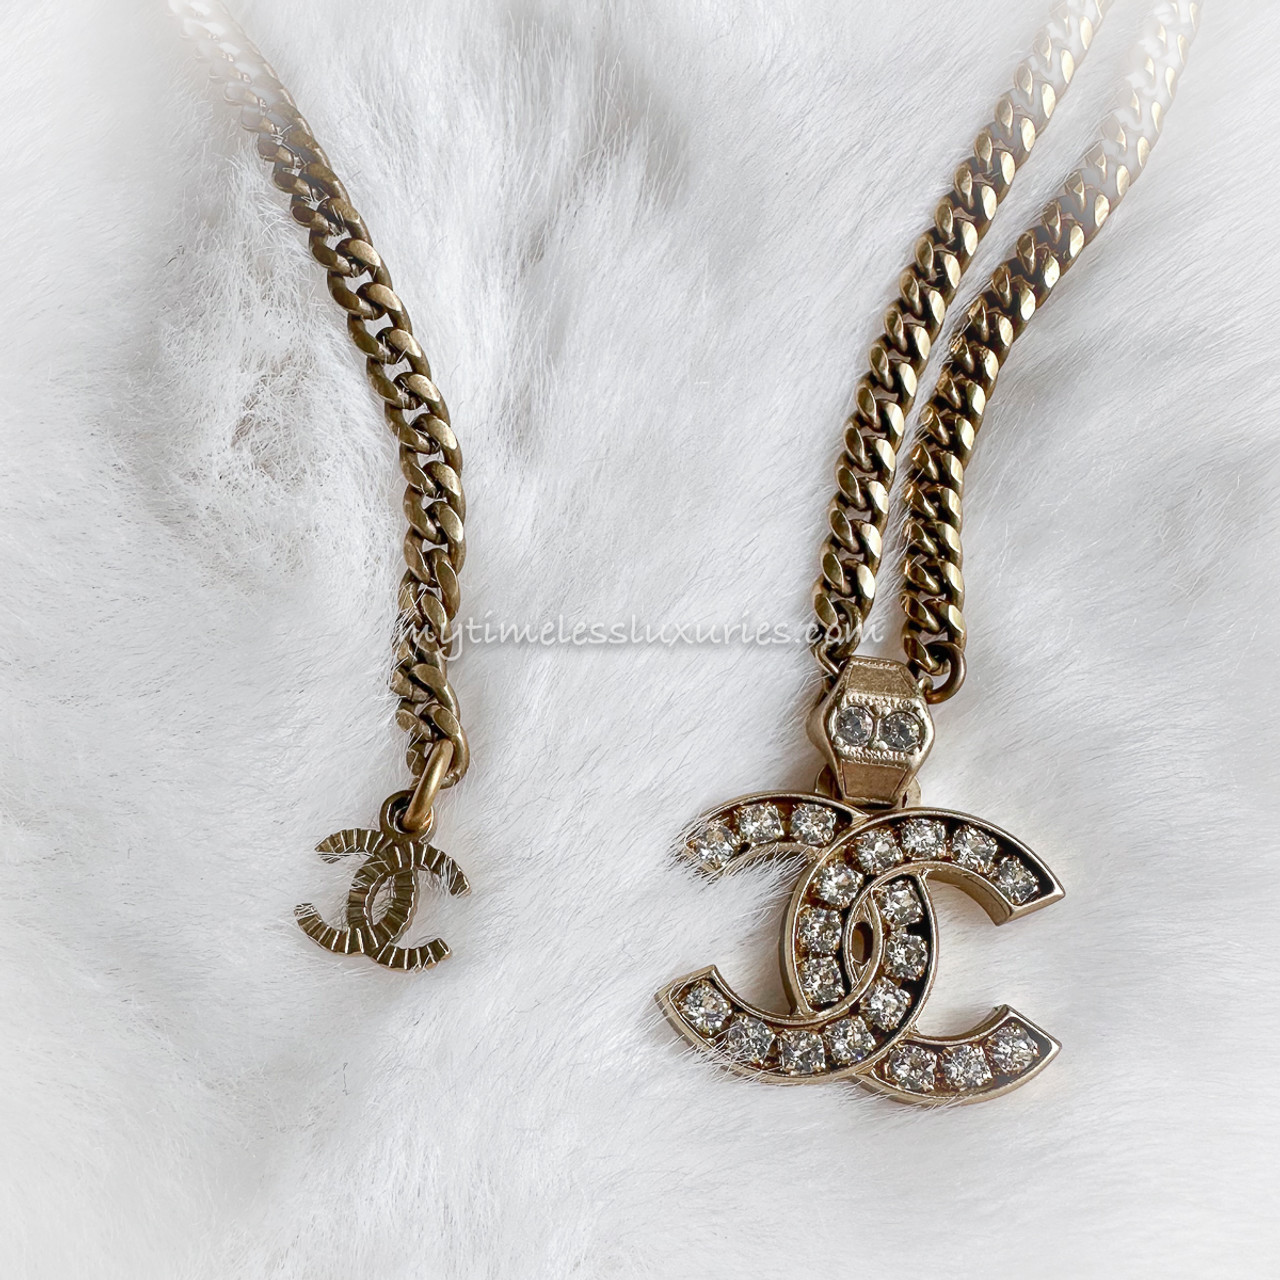 CHANEL 21C Crystal CC Necklace - Timeless Luxuries